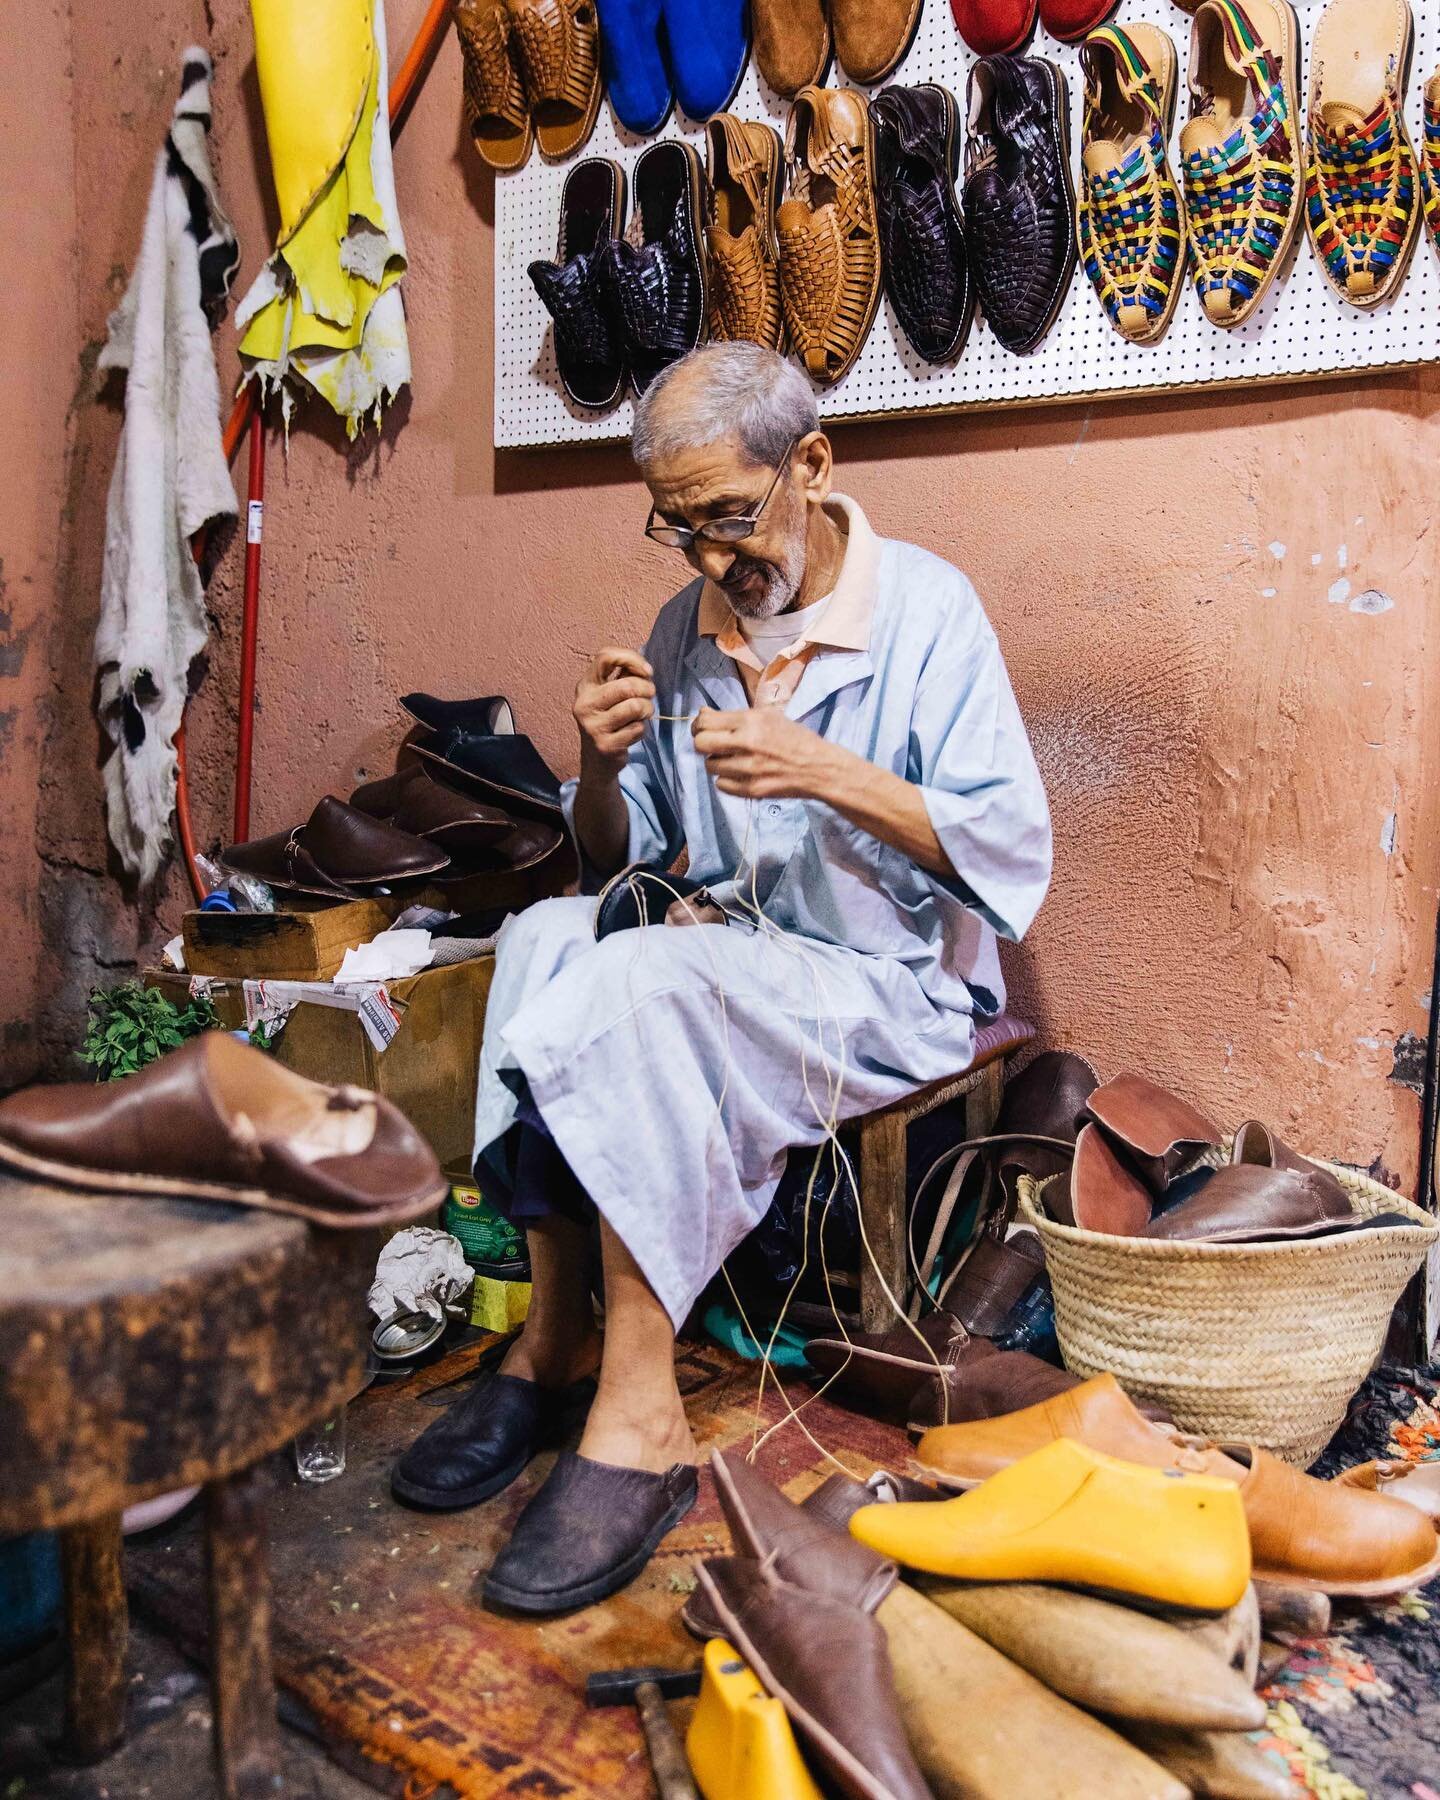 The Medina of Marrakech stands as a living testament to the ingenuity and creativity of its skilled craftsmen and women. Renowned for their expertise, Marrakechi artisans preserve age-old techniques, passed down through generations, while infusing th